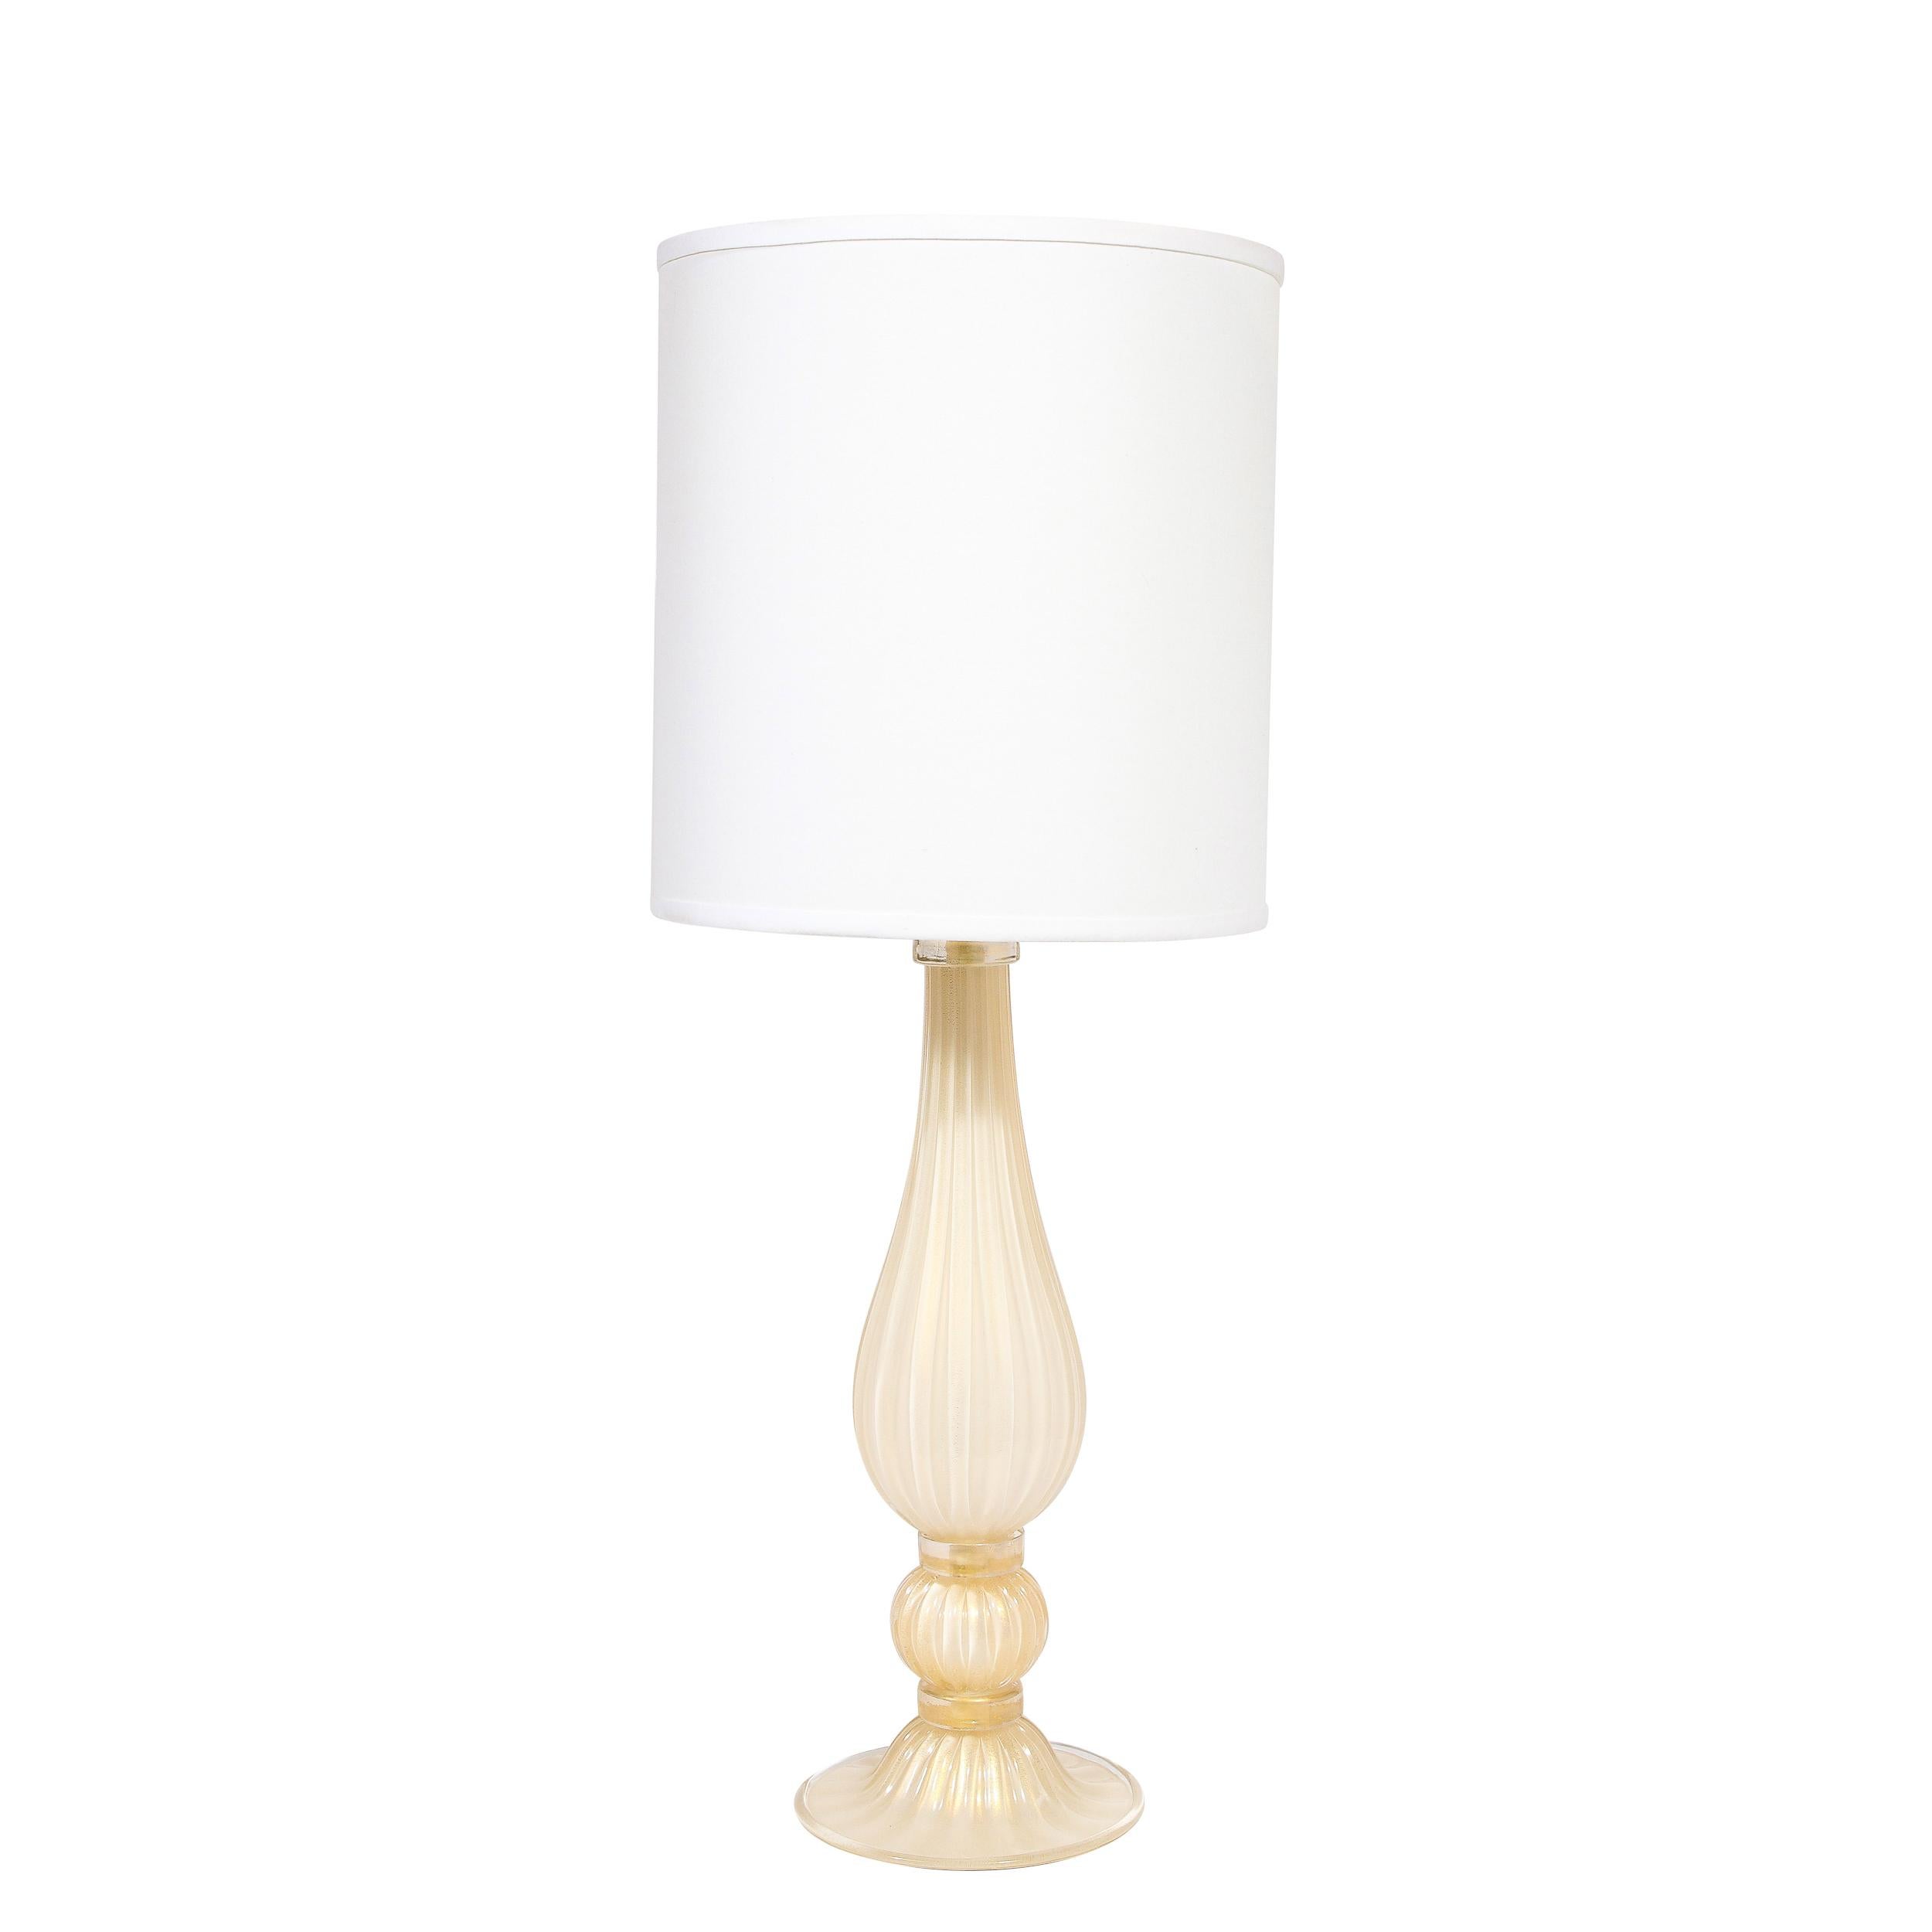 This elegant pair of table lamps were handblown in Murano, Italy- the island off the coast of Venice renowned for centuries for its superlative glass production. They feature tear drop form bodies in handblown translucent reeded glass in a